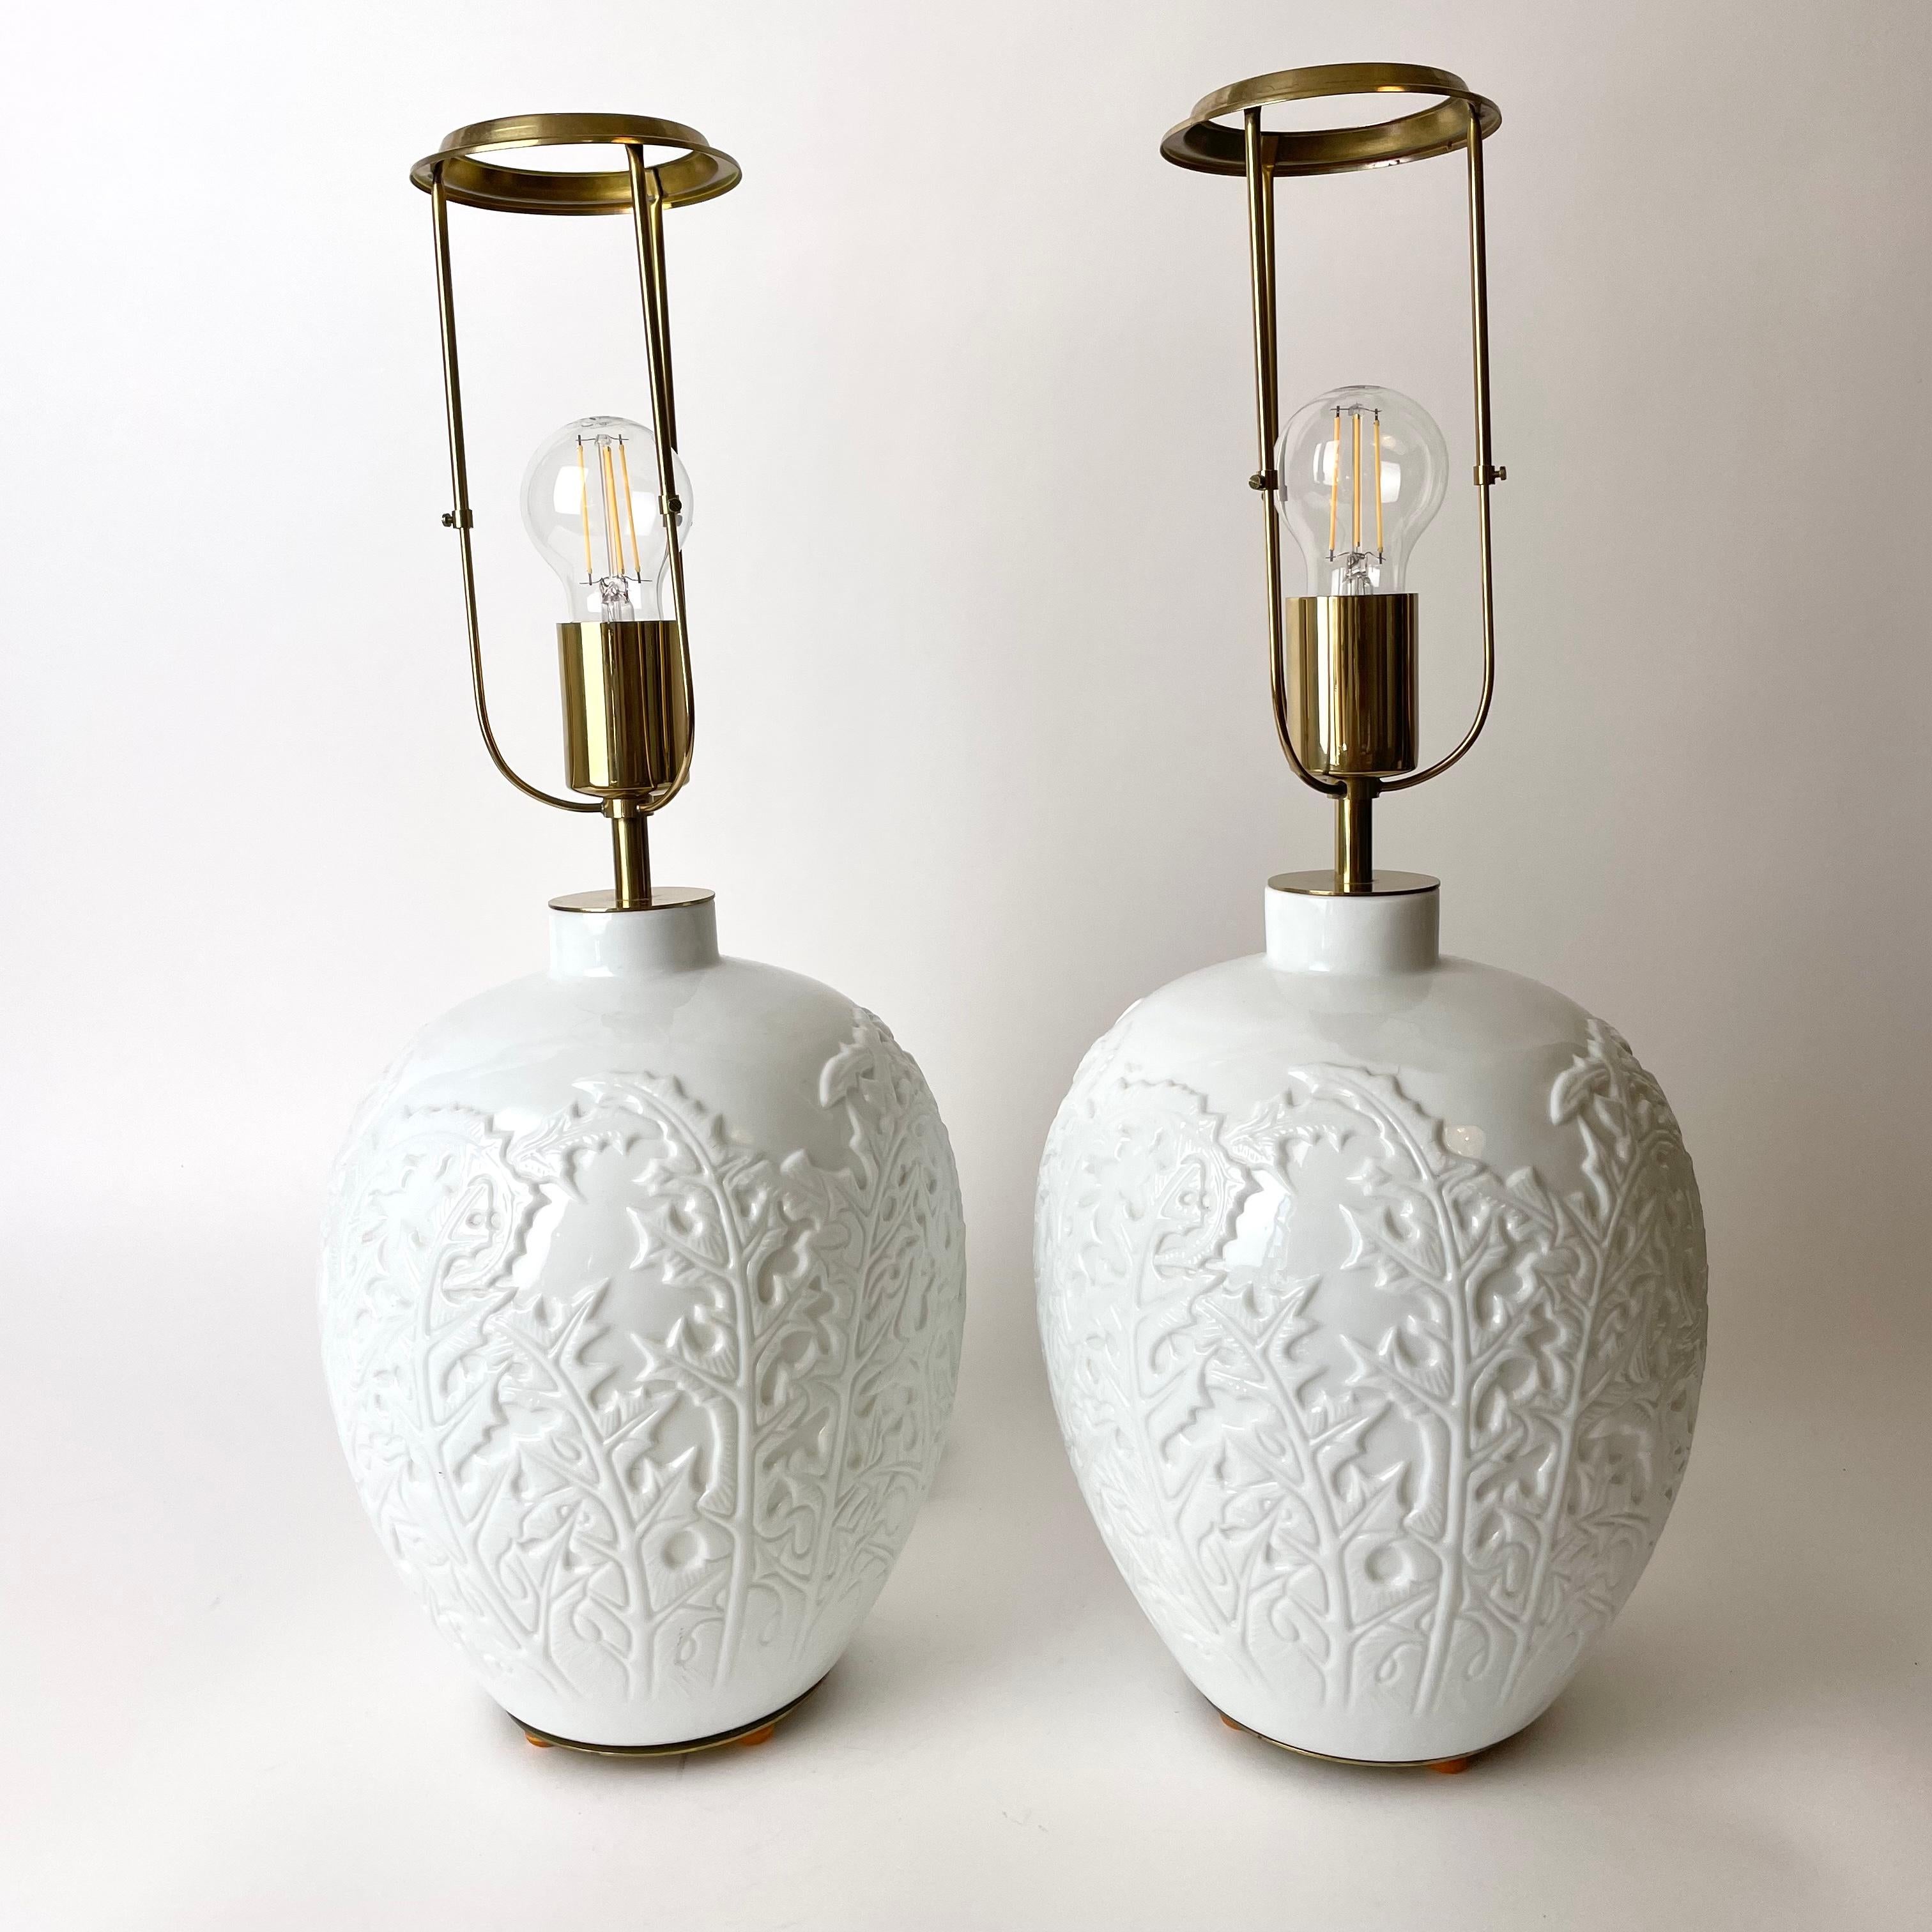 A beautiful and big pair of Table Lamps from Firma Svenskt Tenn, Sweden in opaline white glass with details i brass. Mid-20th Century. Elegantly decorated with thistles. Very unusual model.

Newly drawn electricity.

Wear consistent with age and